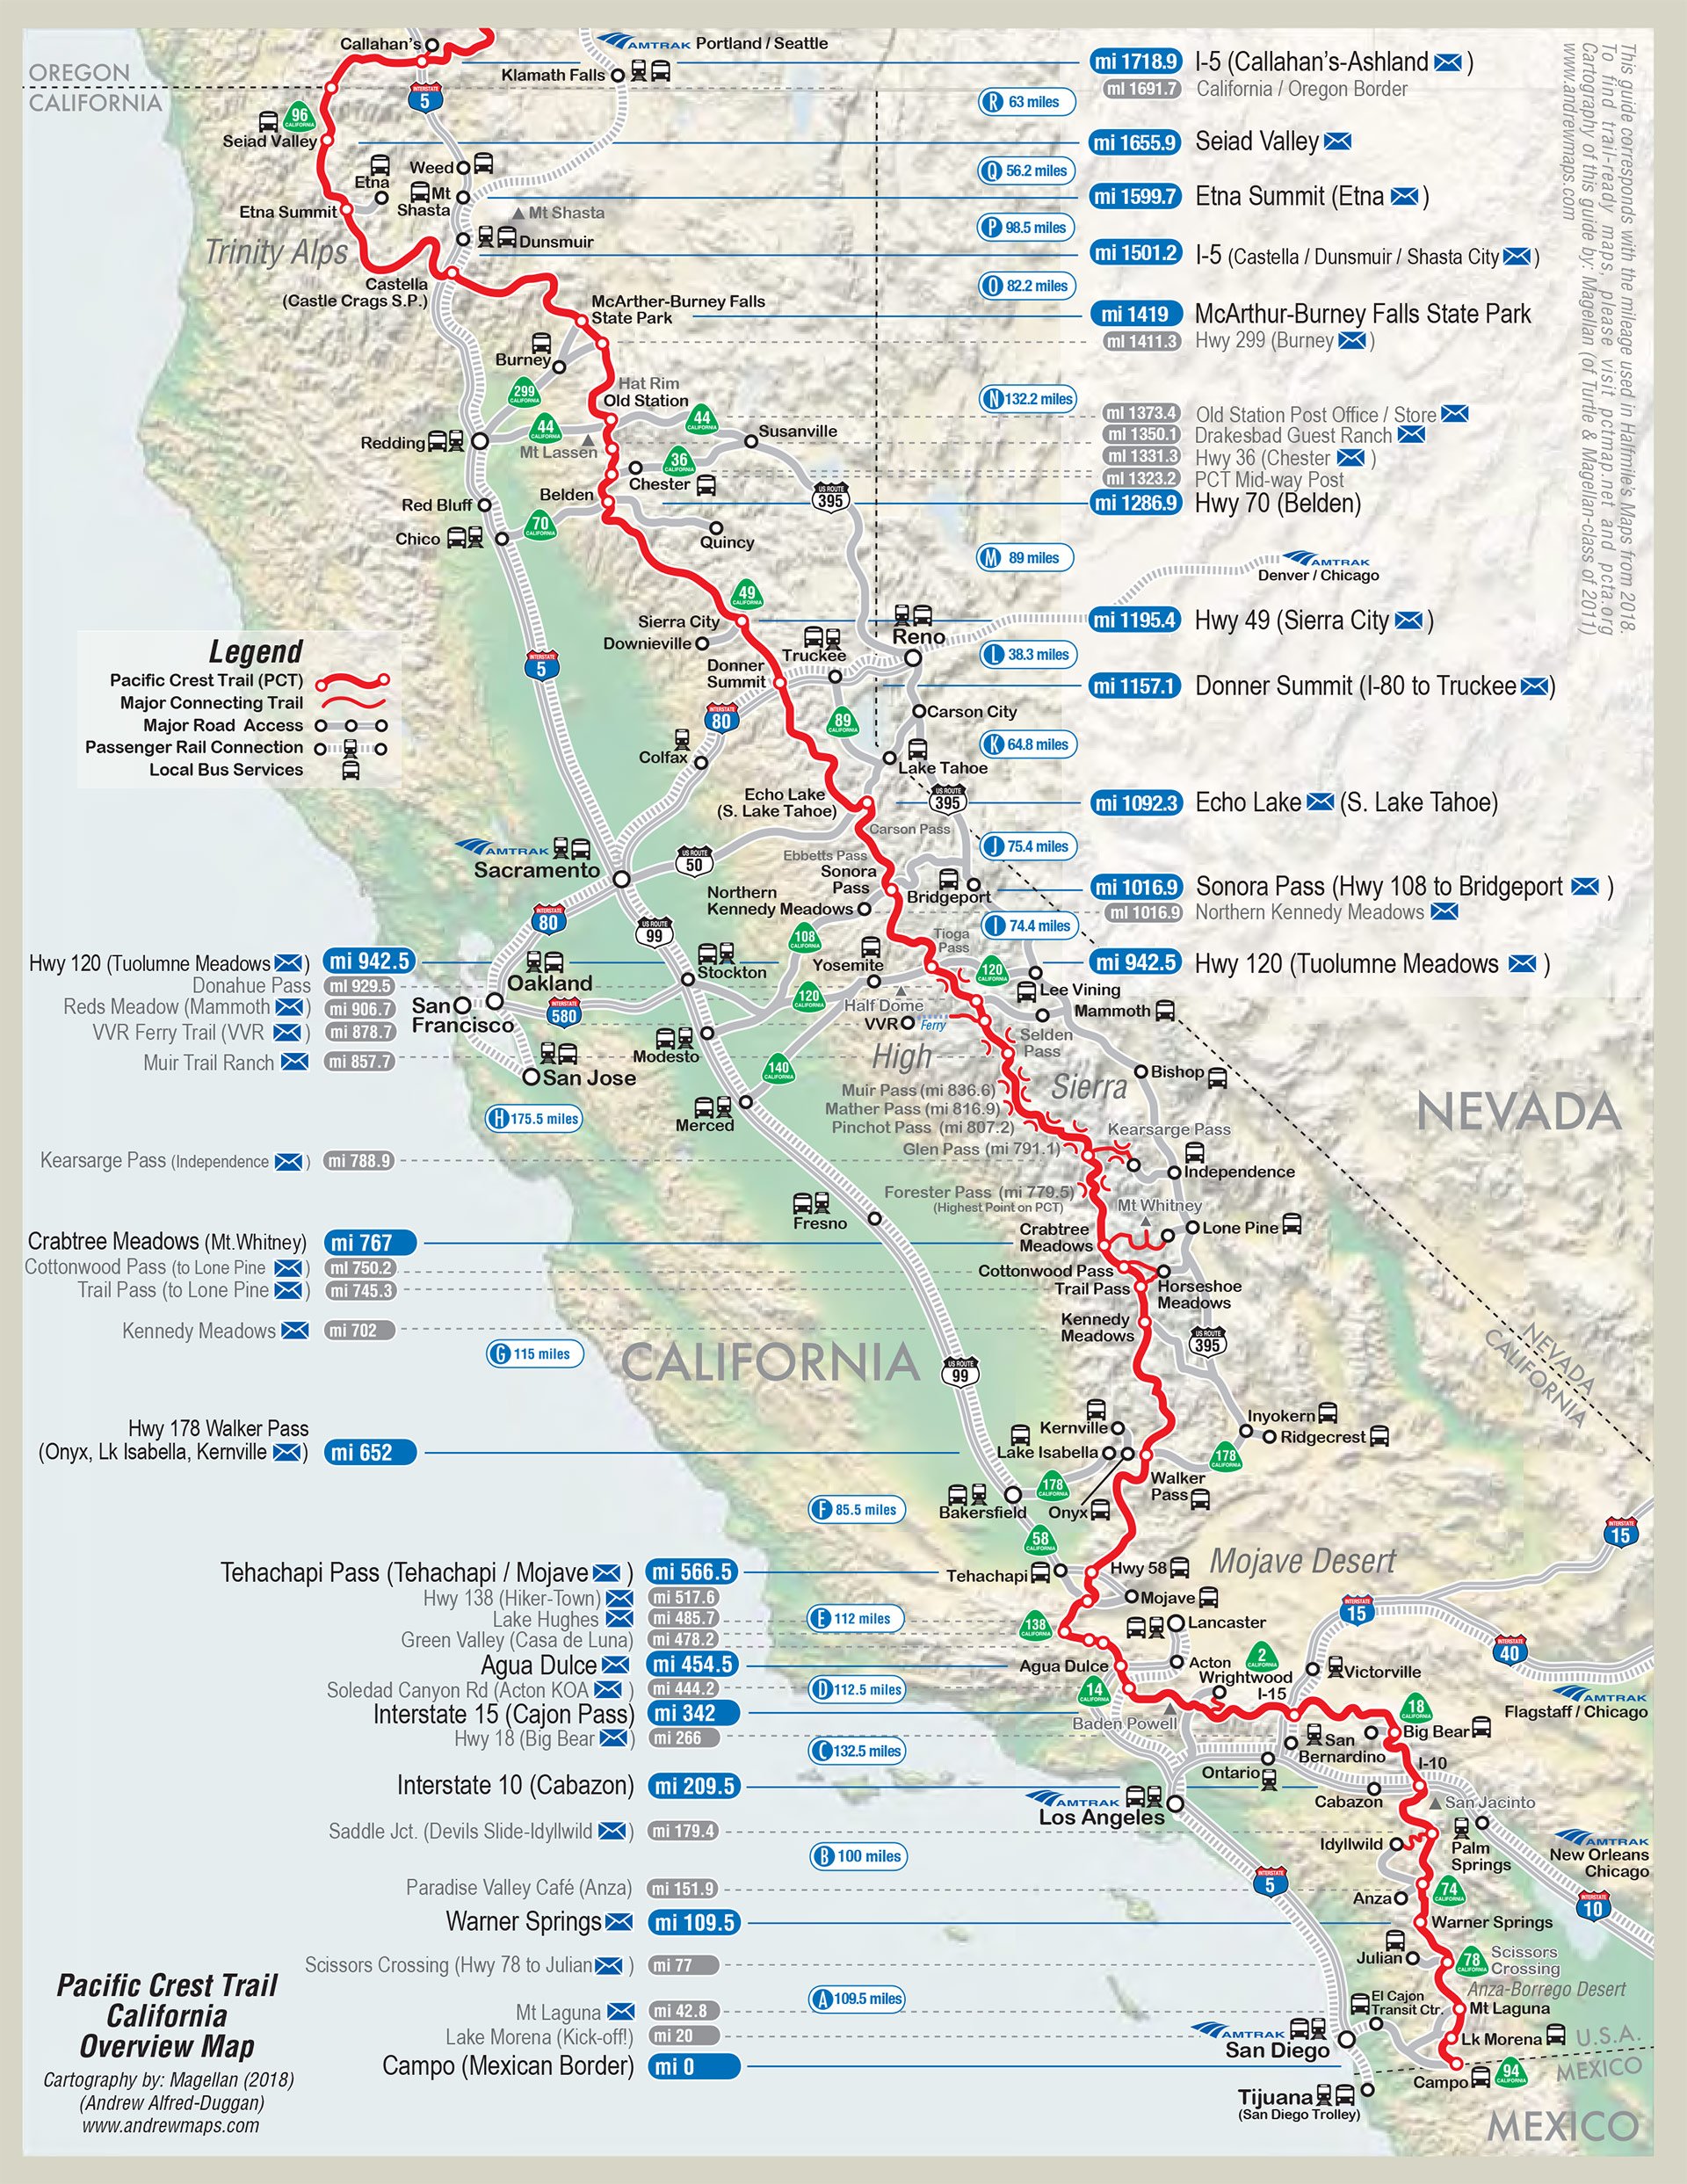 PCT resupply towns and locations - Pacific Crest Trail Association